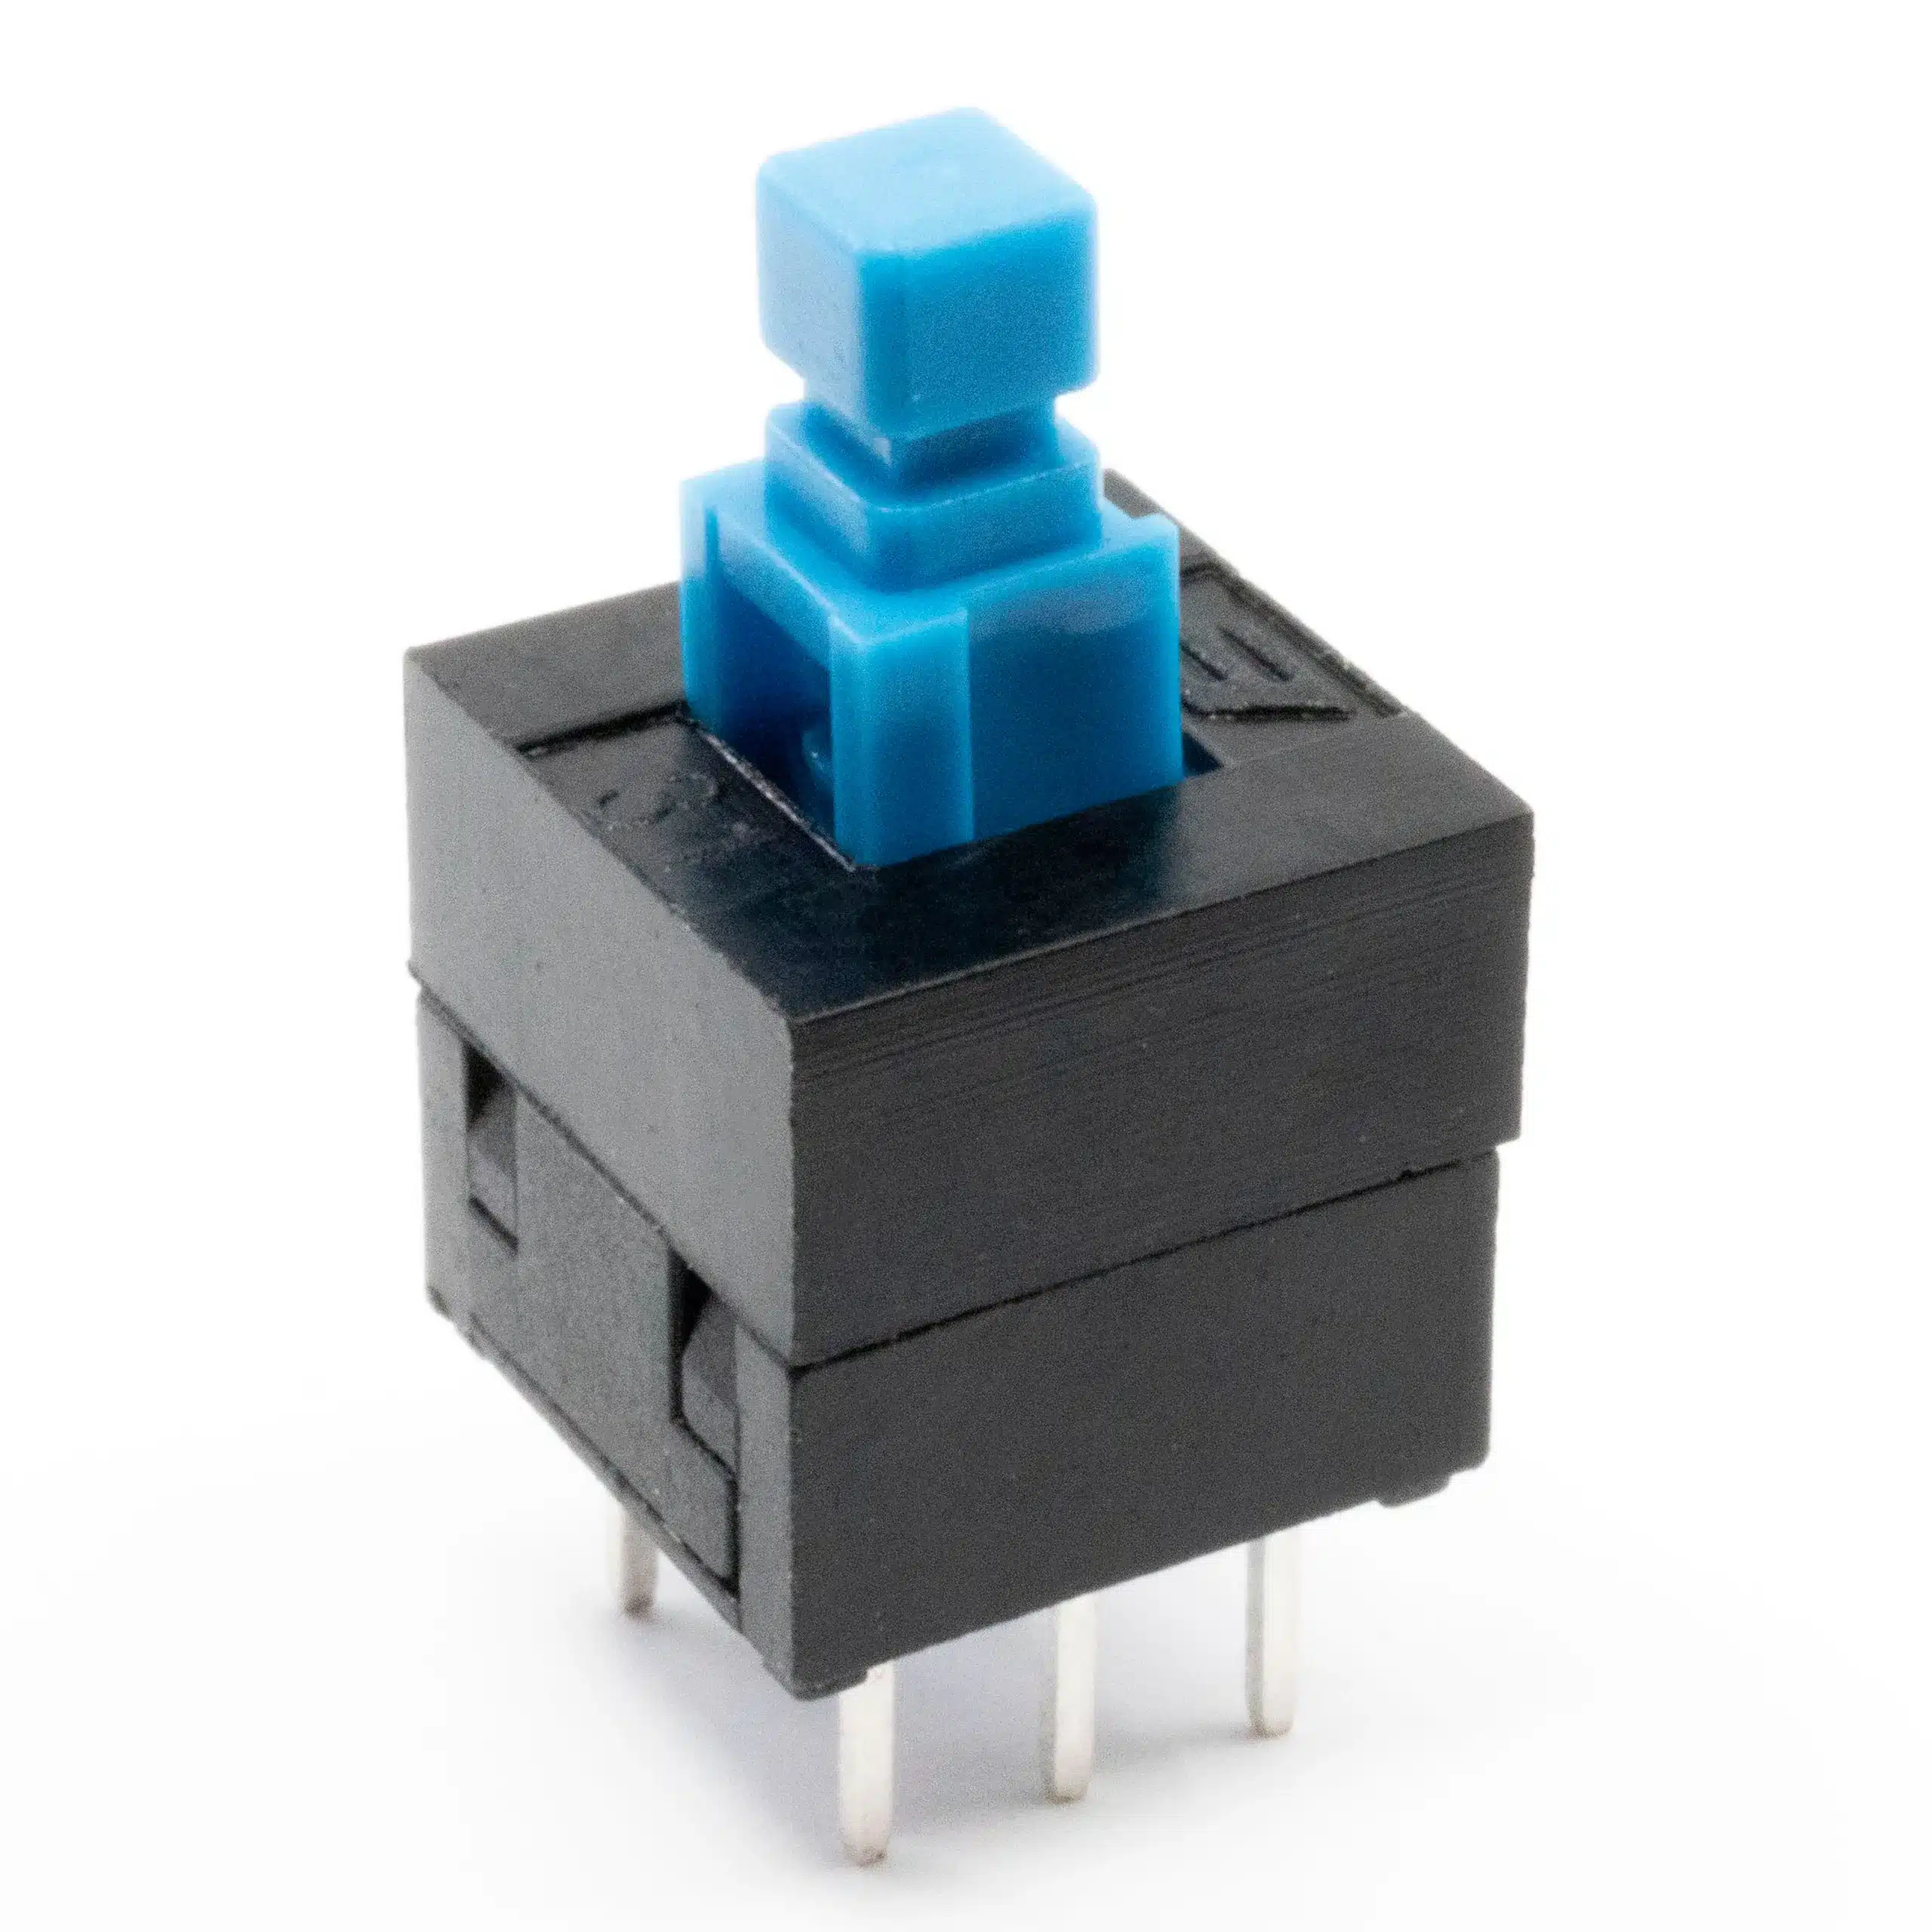 TL2201 and TL4201 Series Subminiature Pushbutton Switches